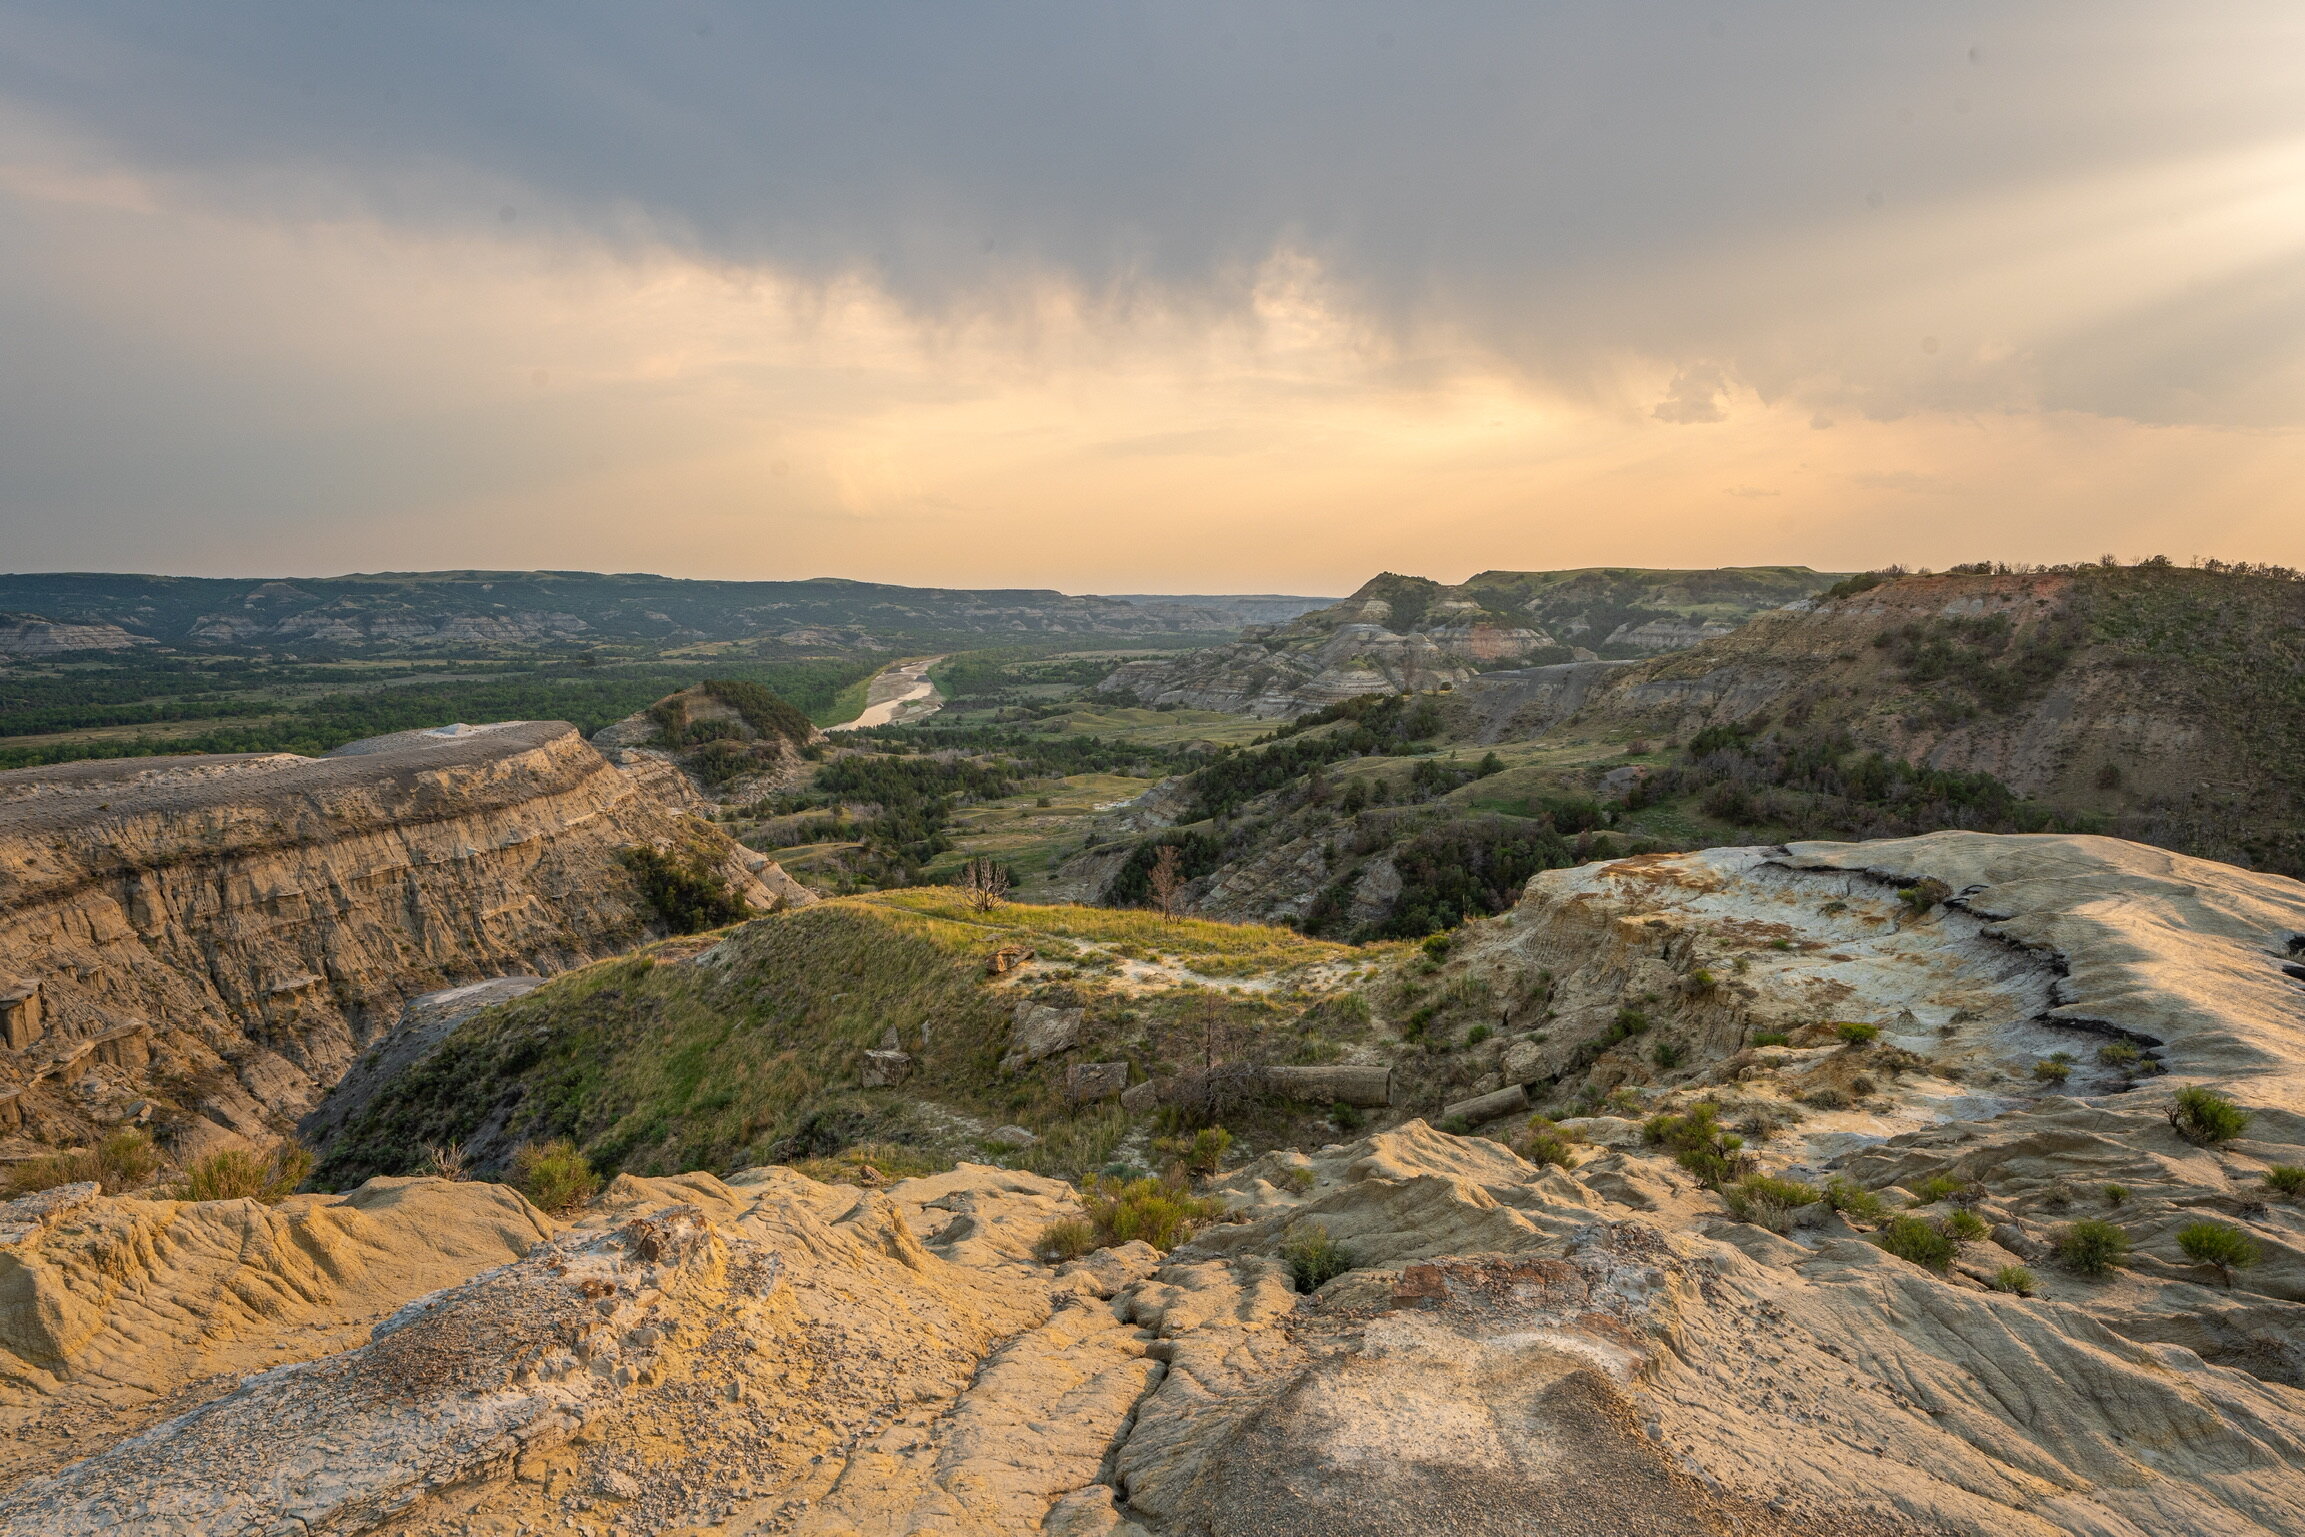   Theodore Roosevelt National Park.  Teddy Roosevelt came from New York to the badlands of North Dakota in 1883 for a time of restoration after a series of tragic personal events, namely the death of his mother and his wife on the same day. He ranche